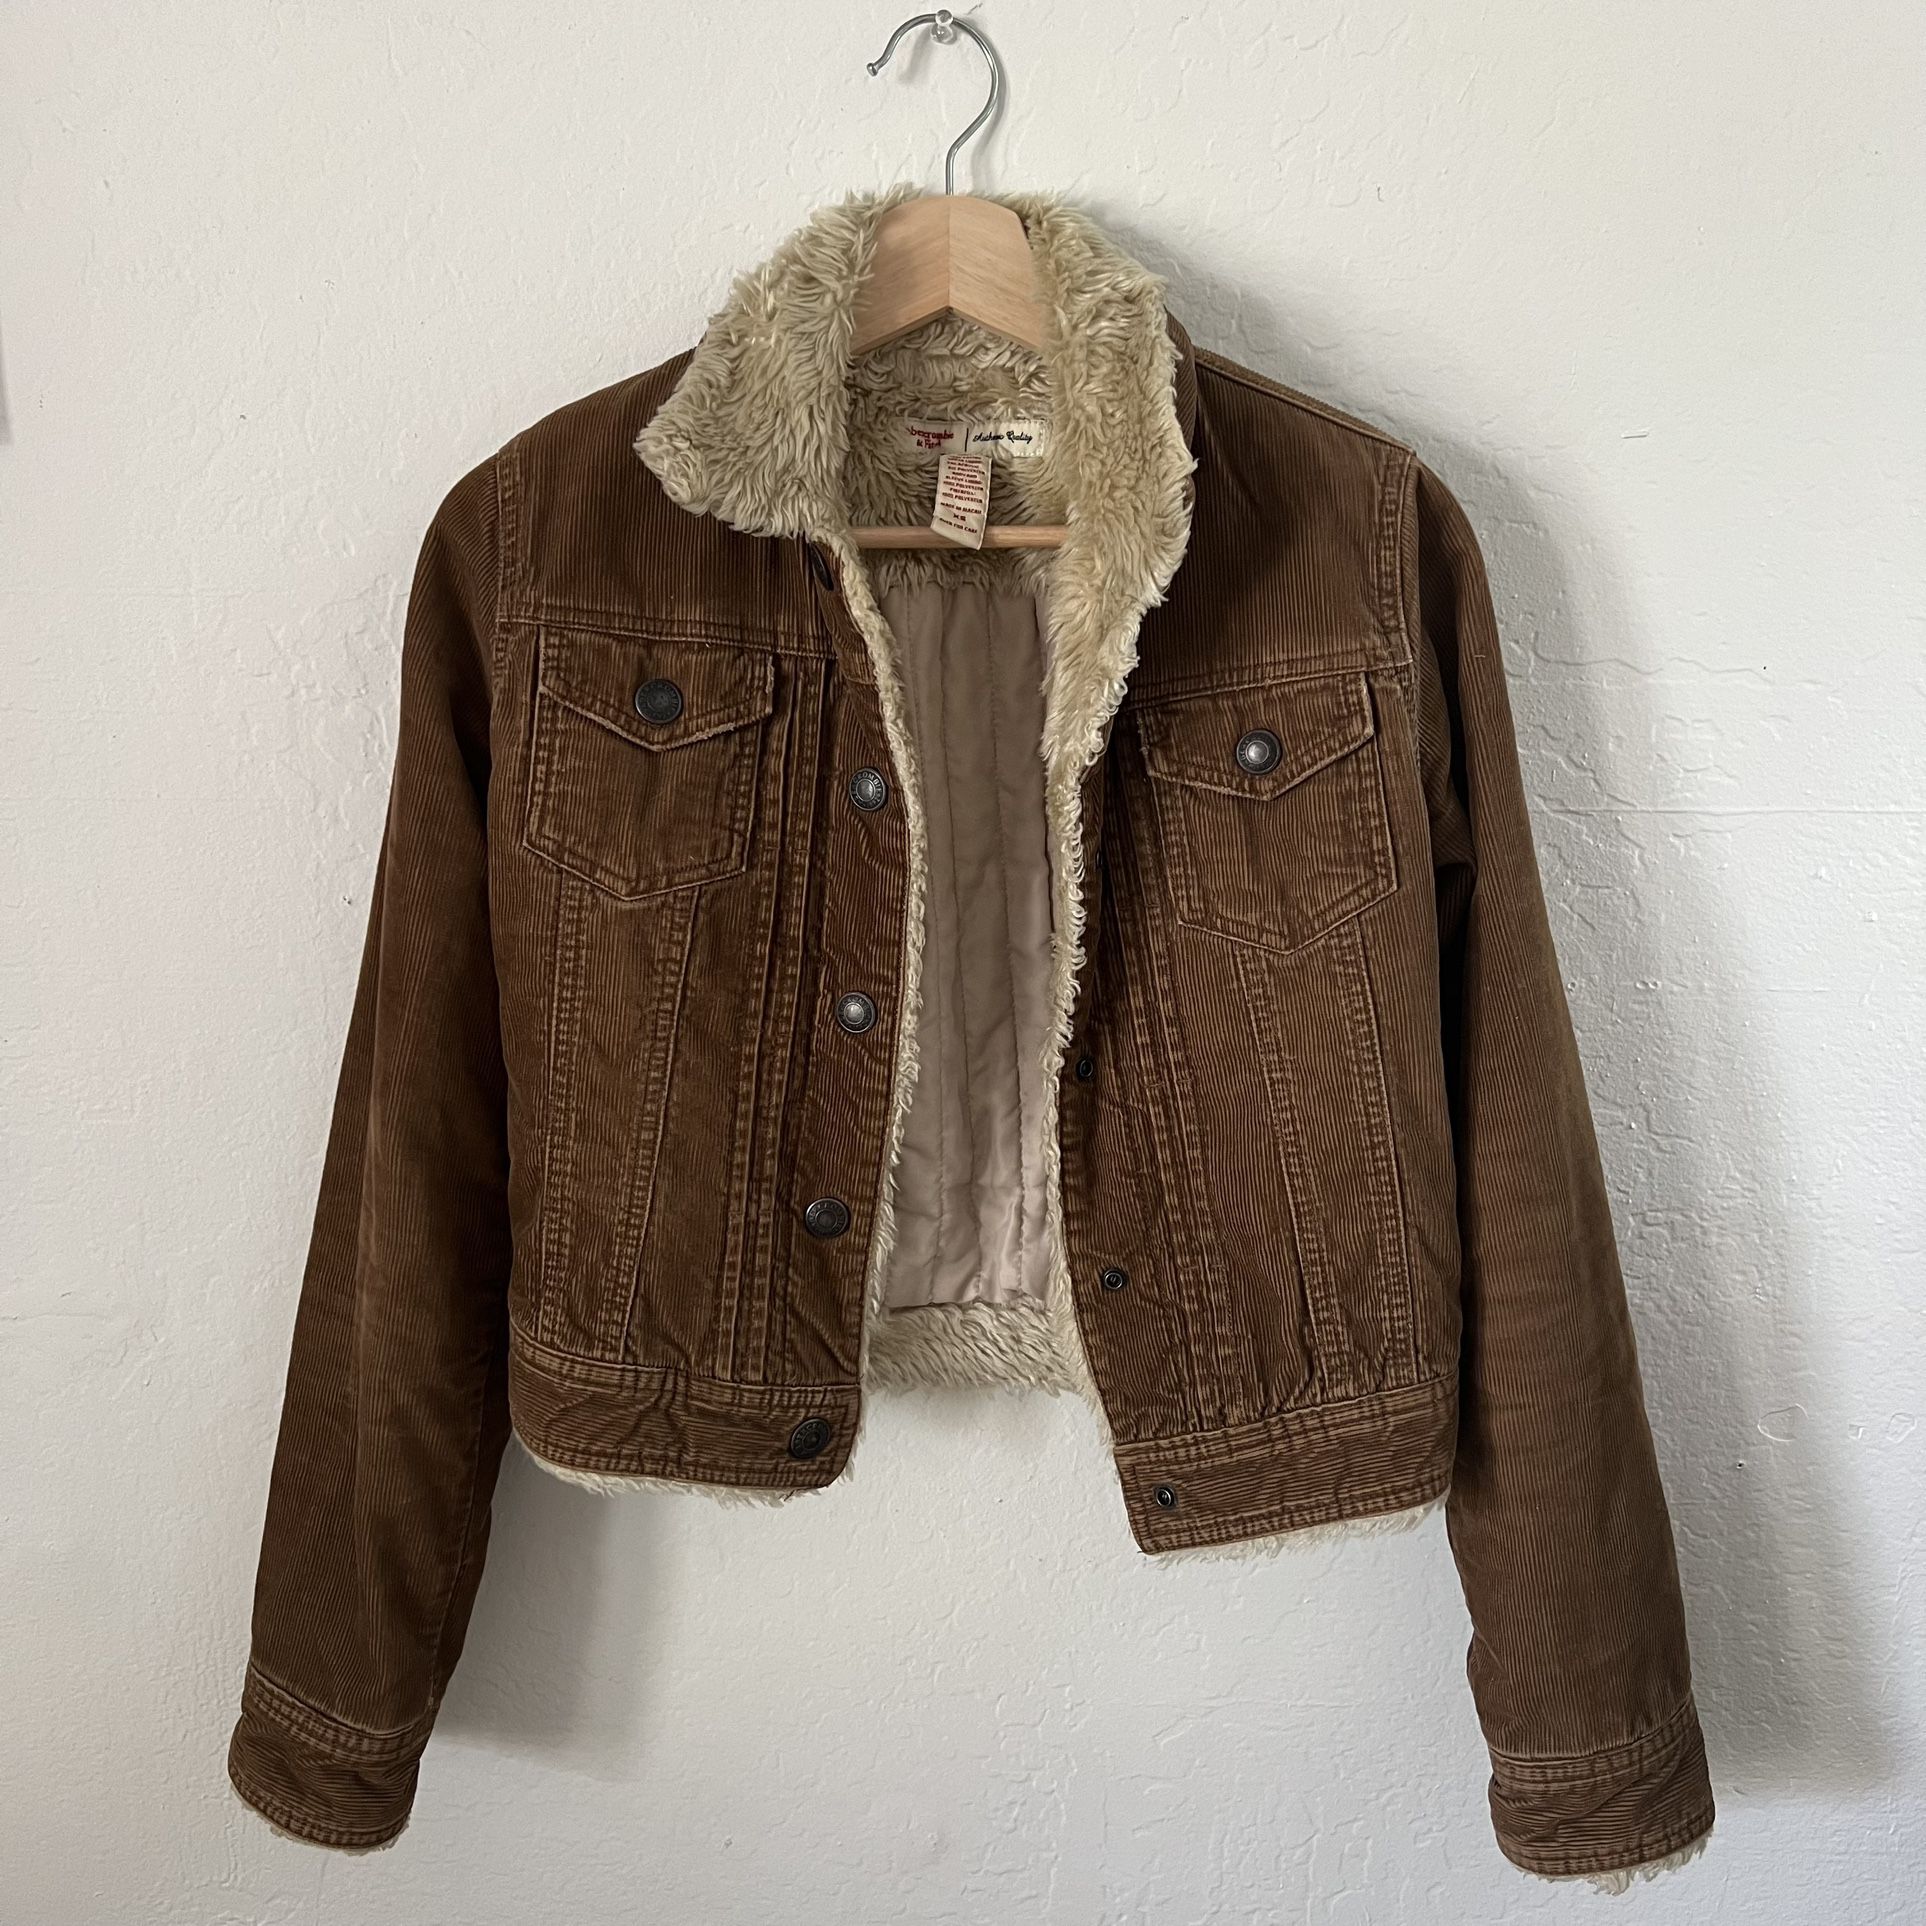 Abercrombie & Fitch Women’s XS Brown Corduroy Fur-lined Jacket